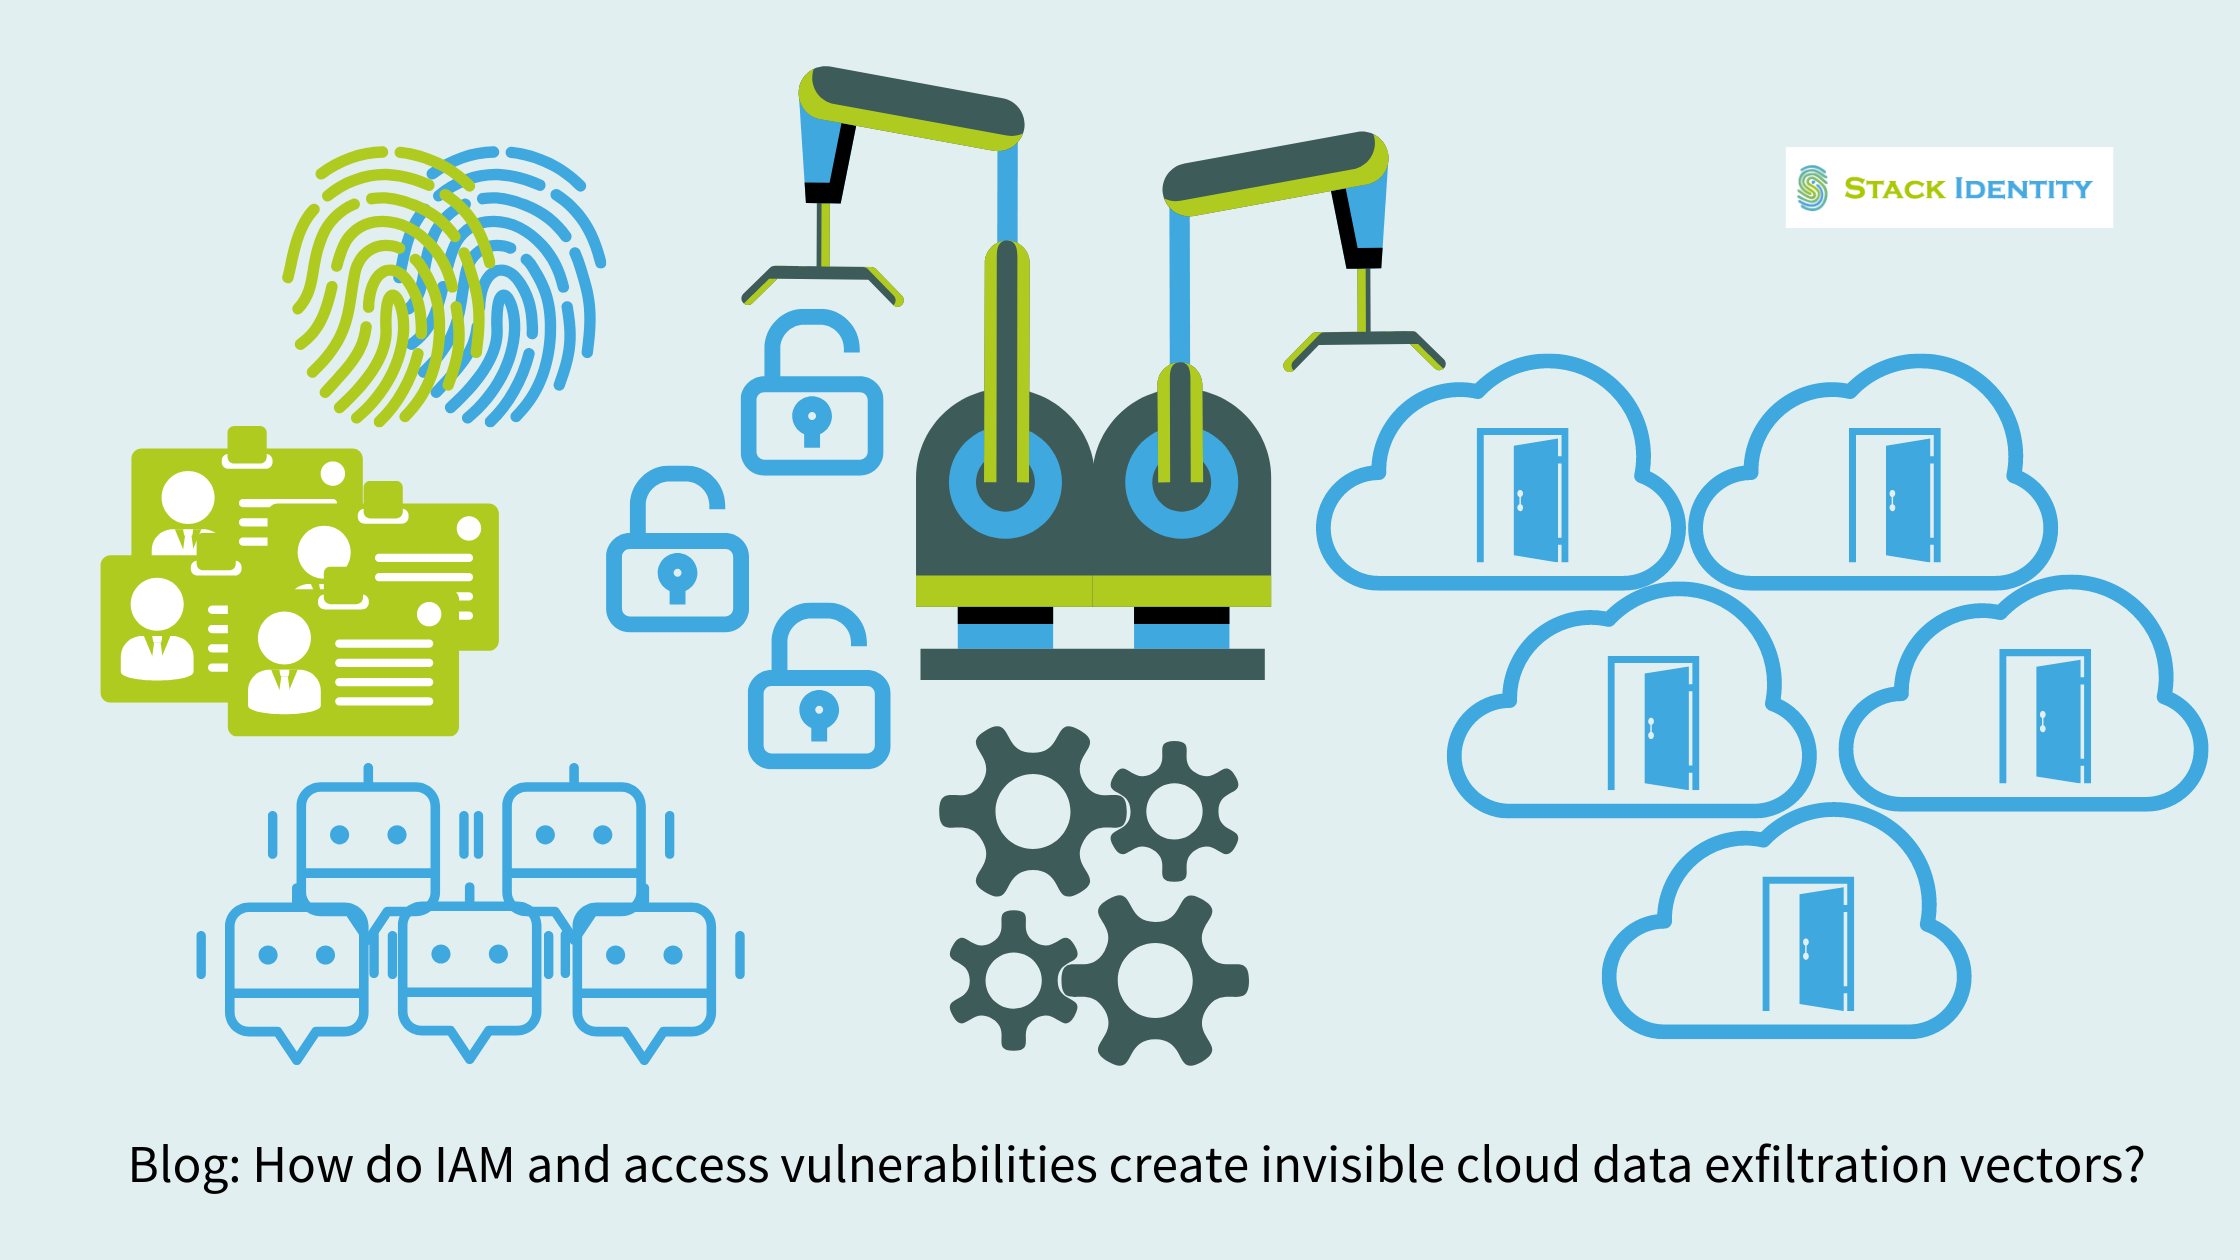 How identity and access vulnerabilities create invisible cloud data exfiltration vectors